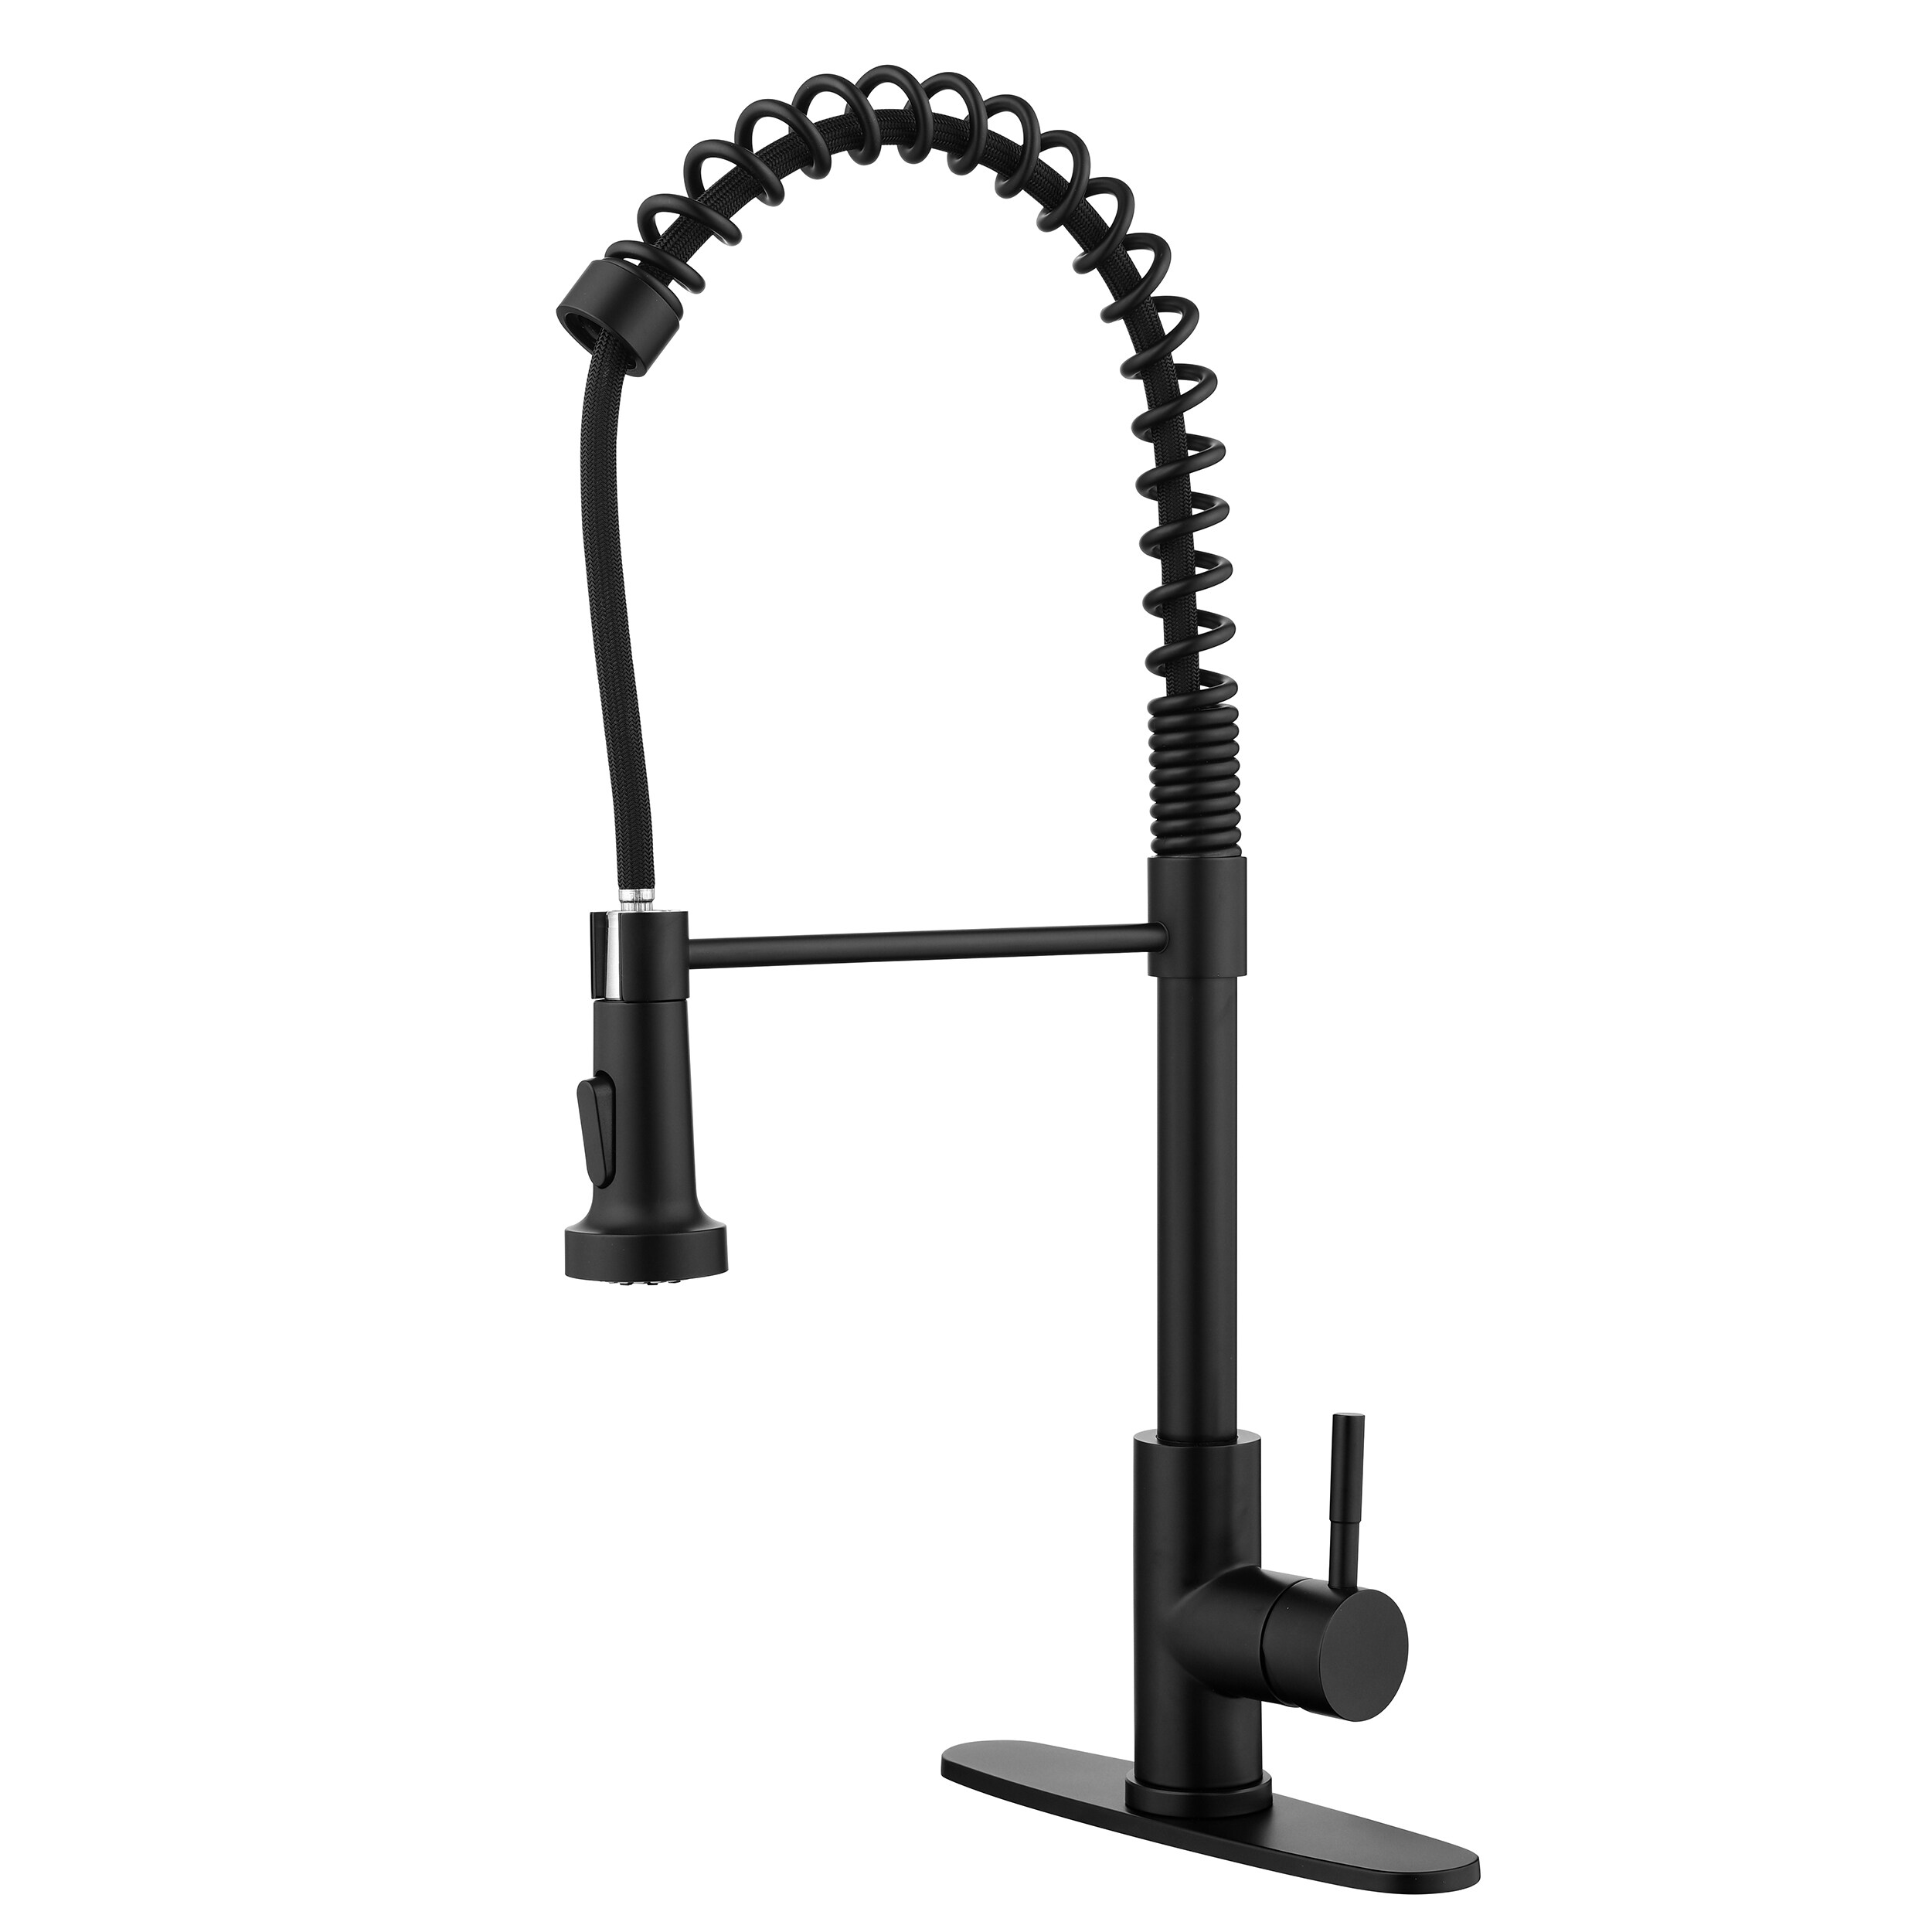 Utopia 4niture Matte Black Single Handle Pull-down Kitchen Faucet with Sprayer Function (Deck Plate Included)